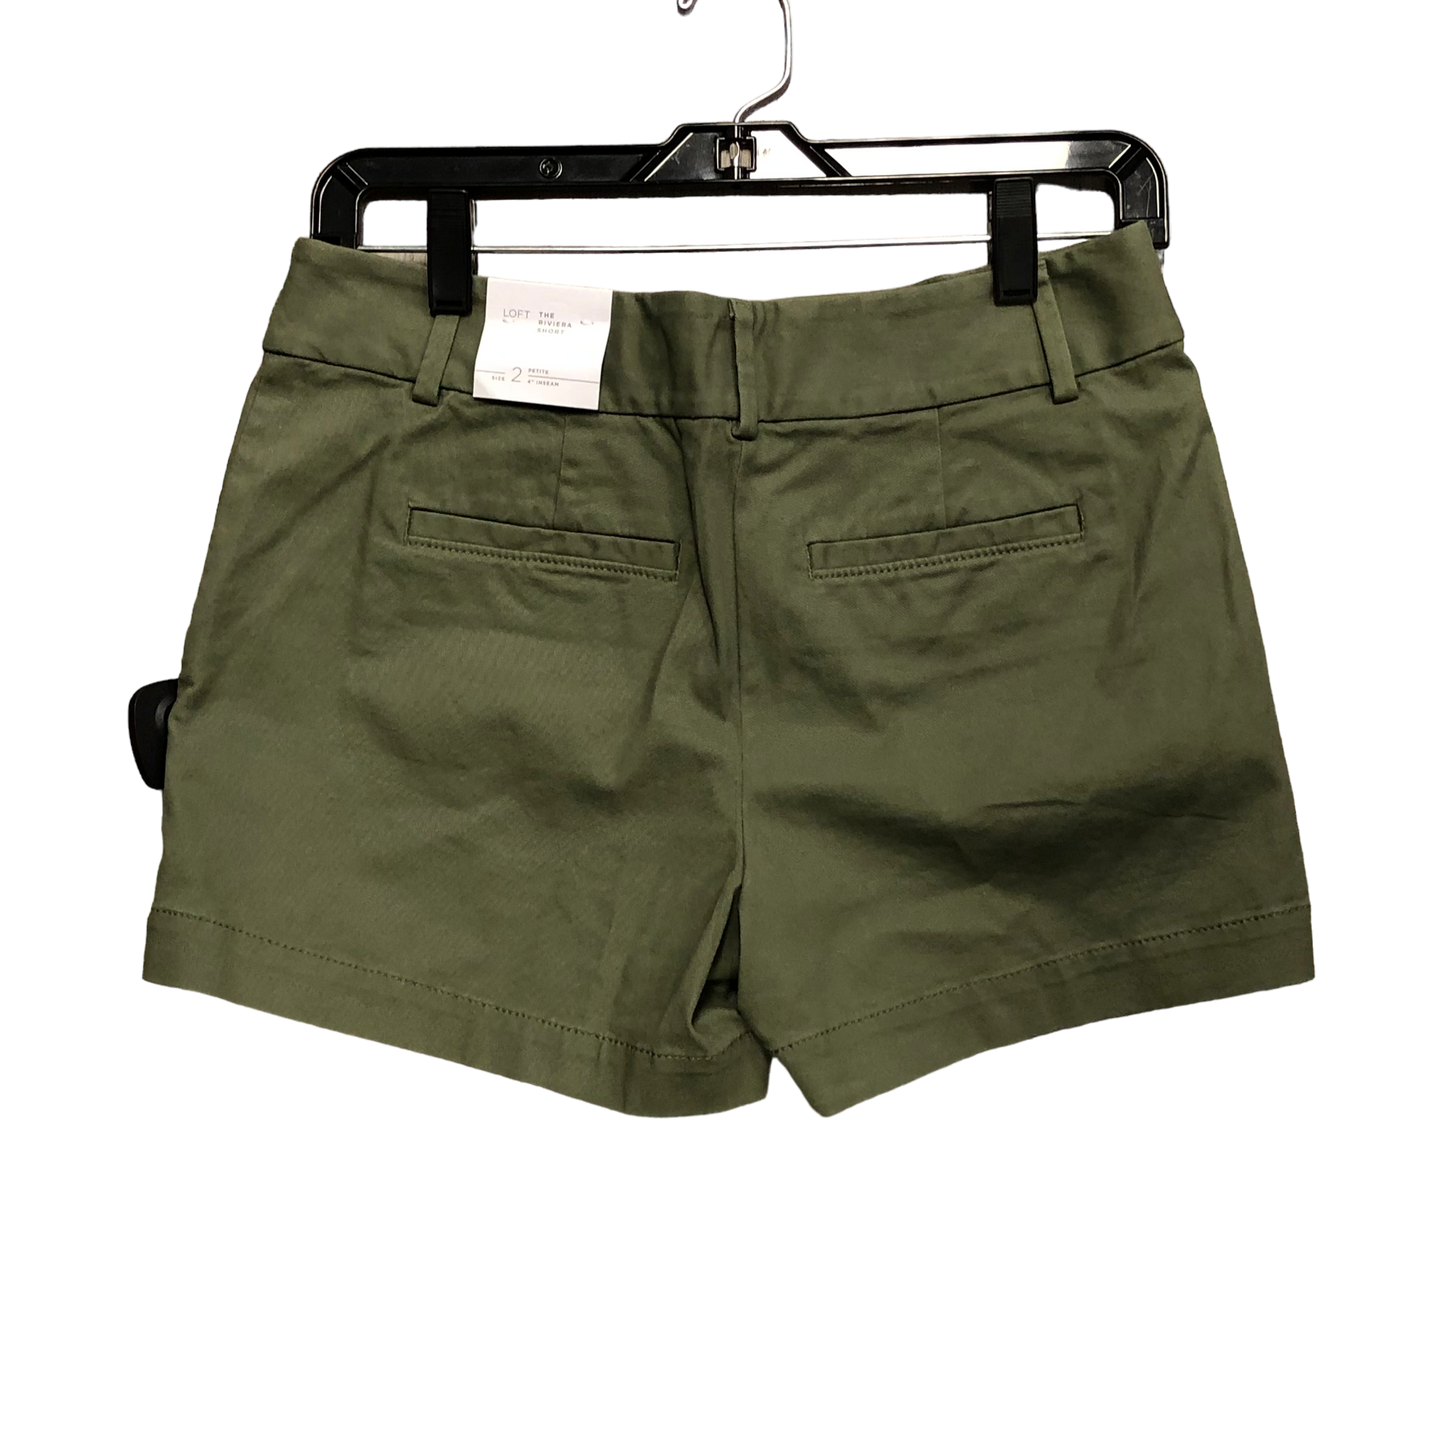 Shorts By Cmc  Size: L